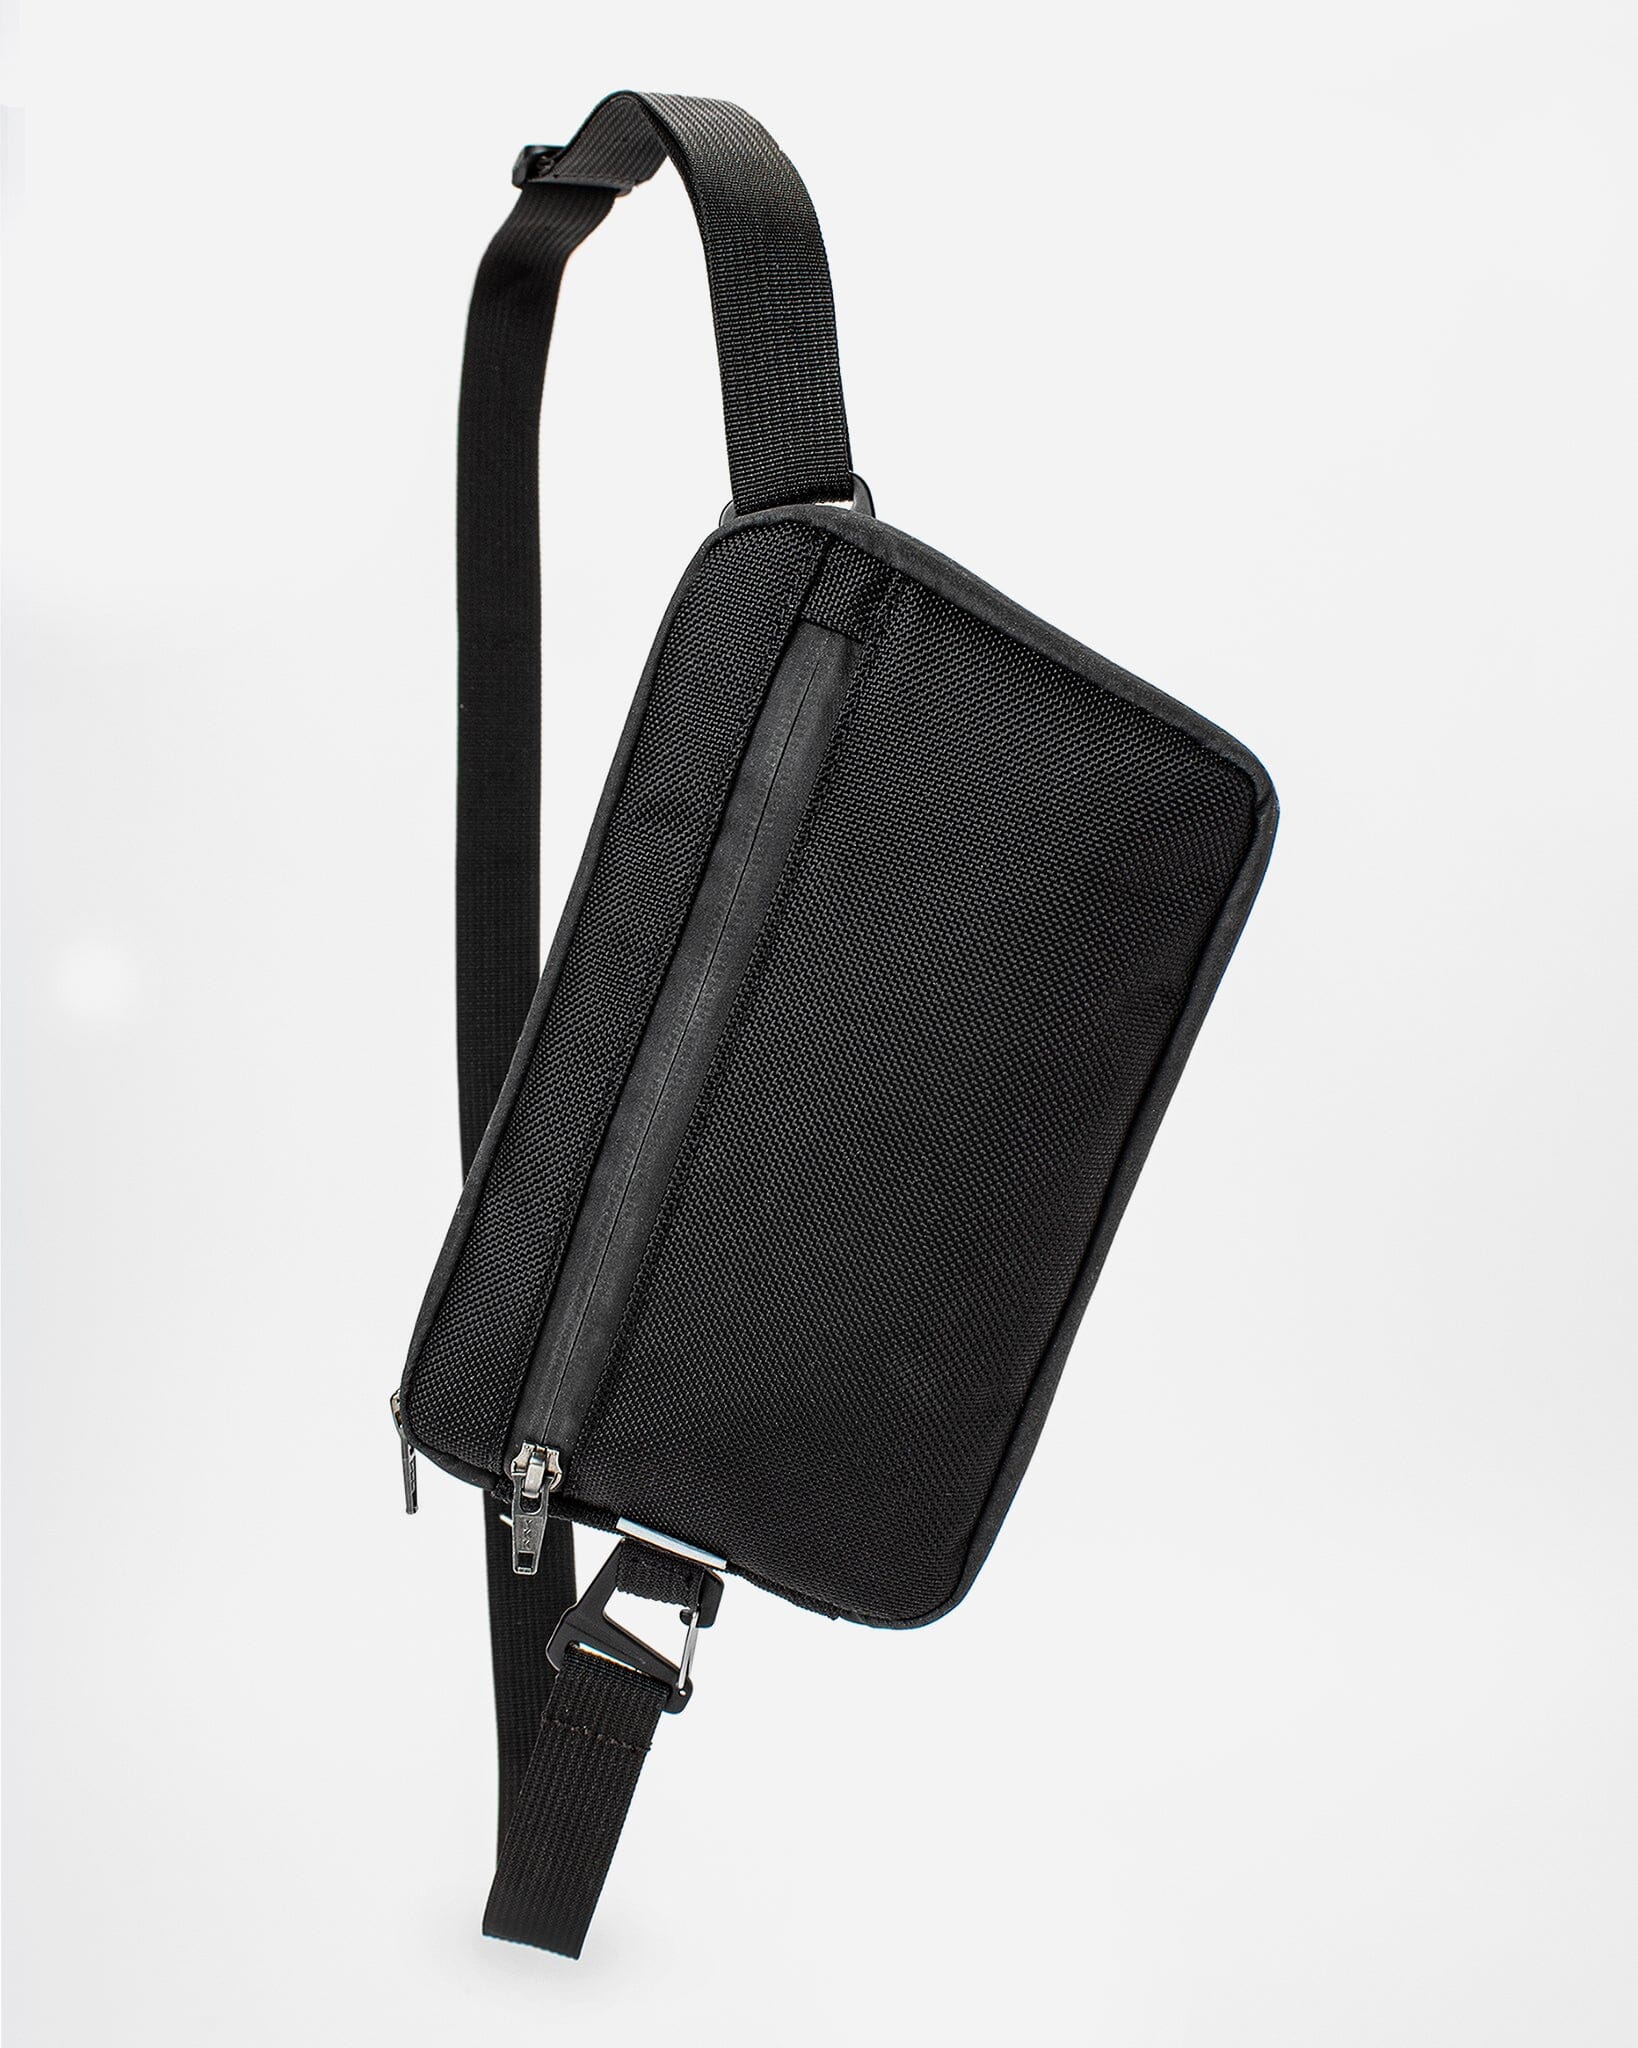 bolstr® AUX Sling: Minimal and perfectly sized. 3 bags in 1. by